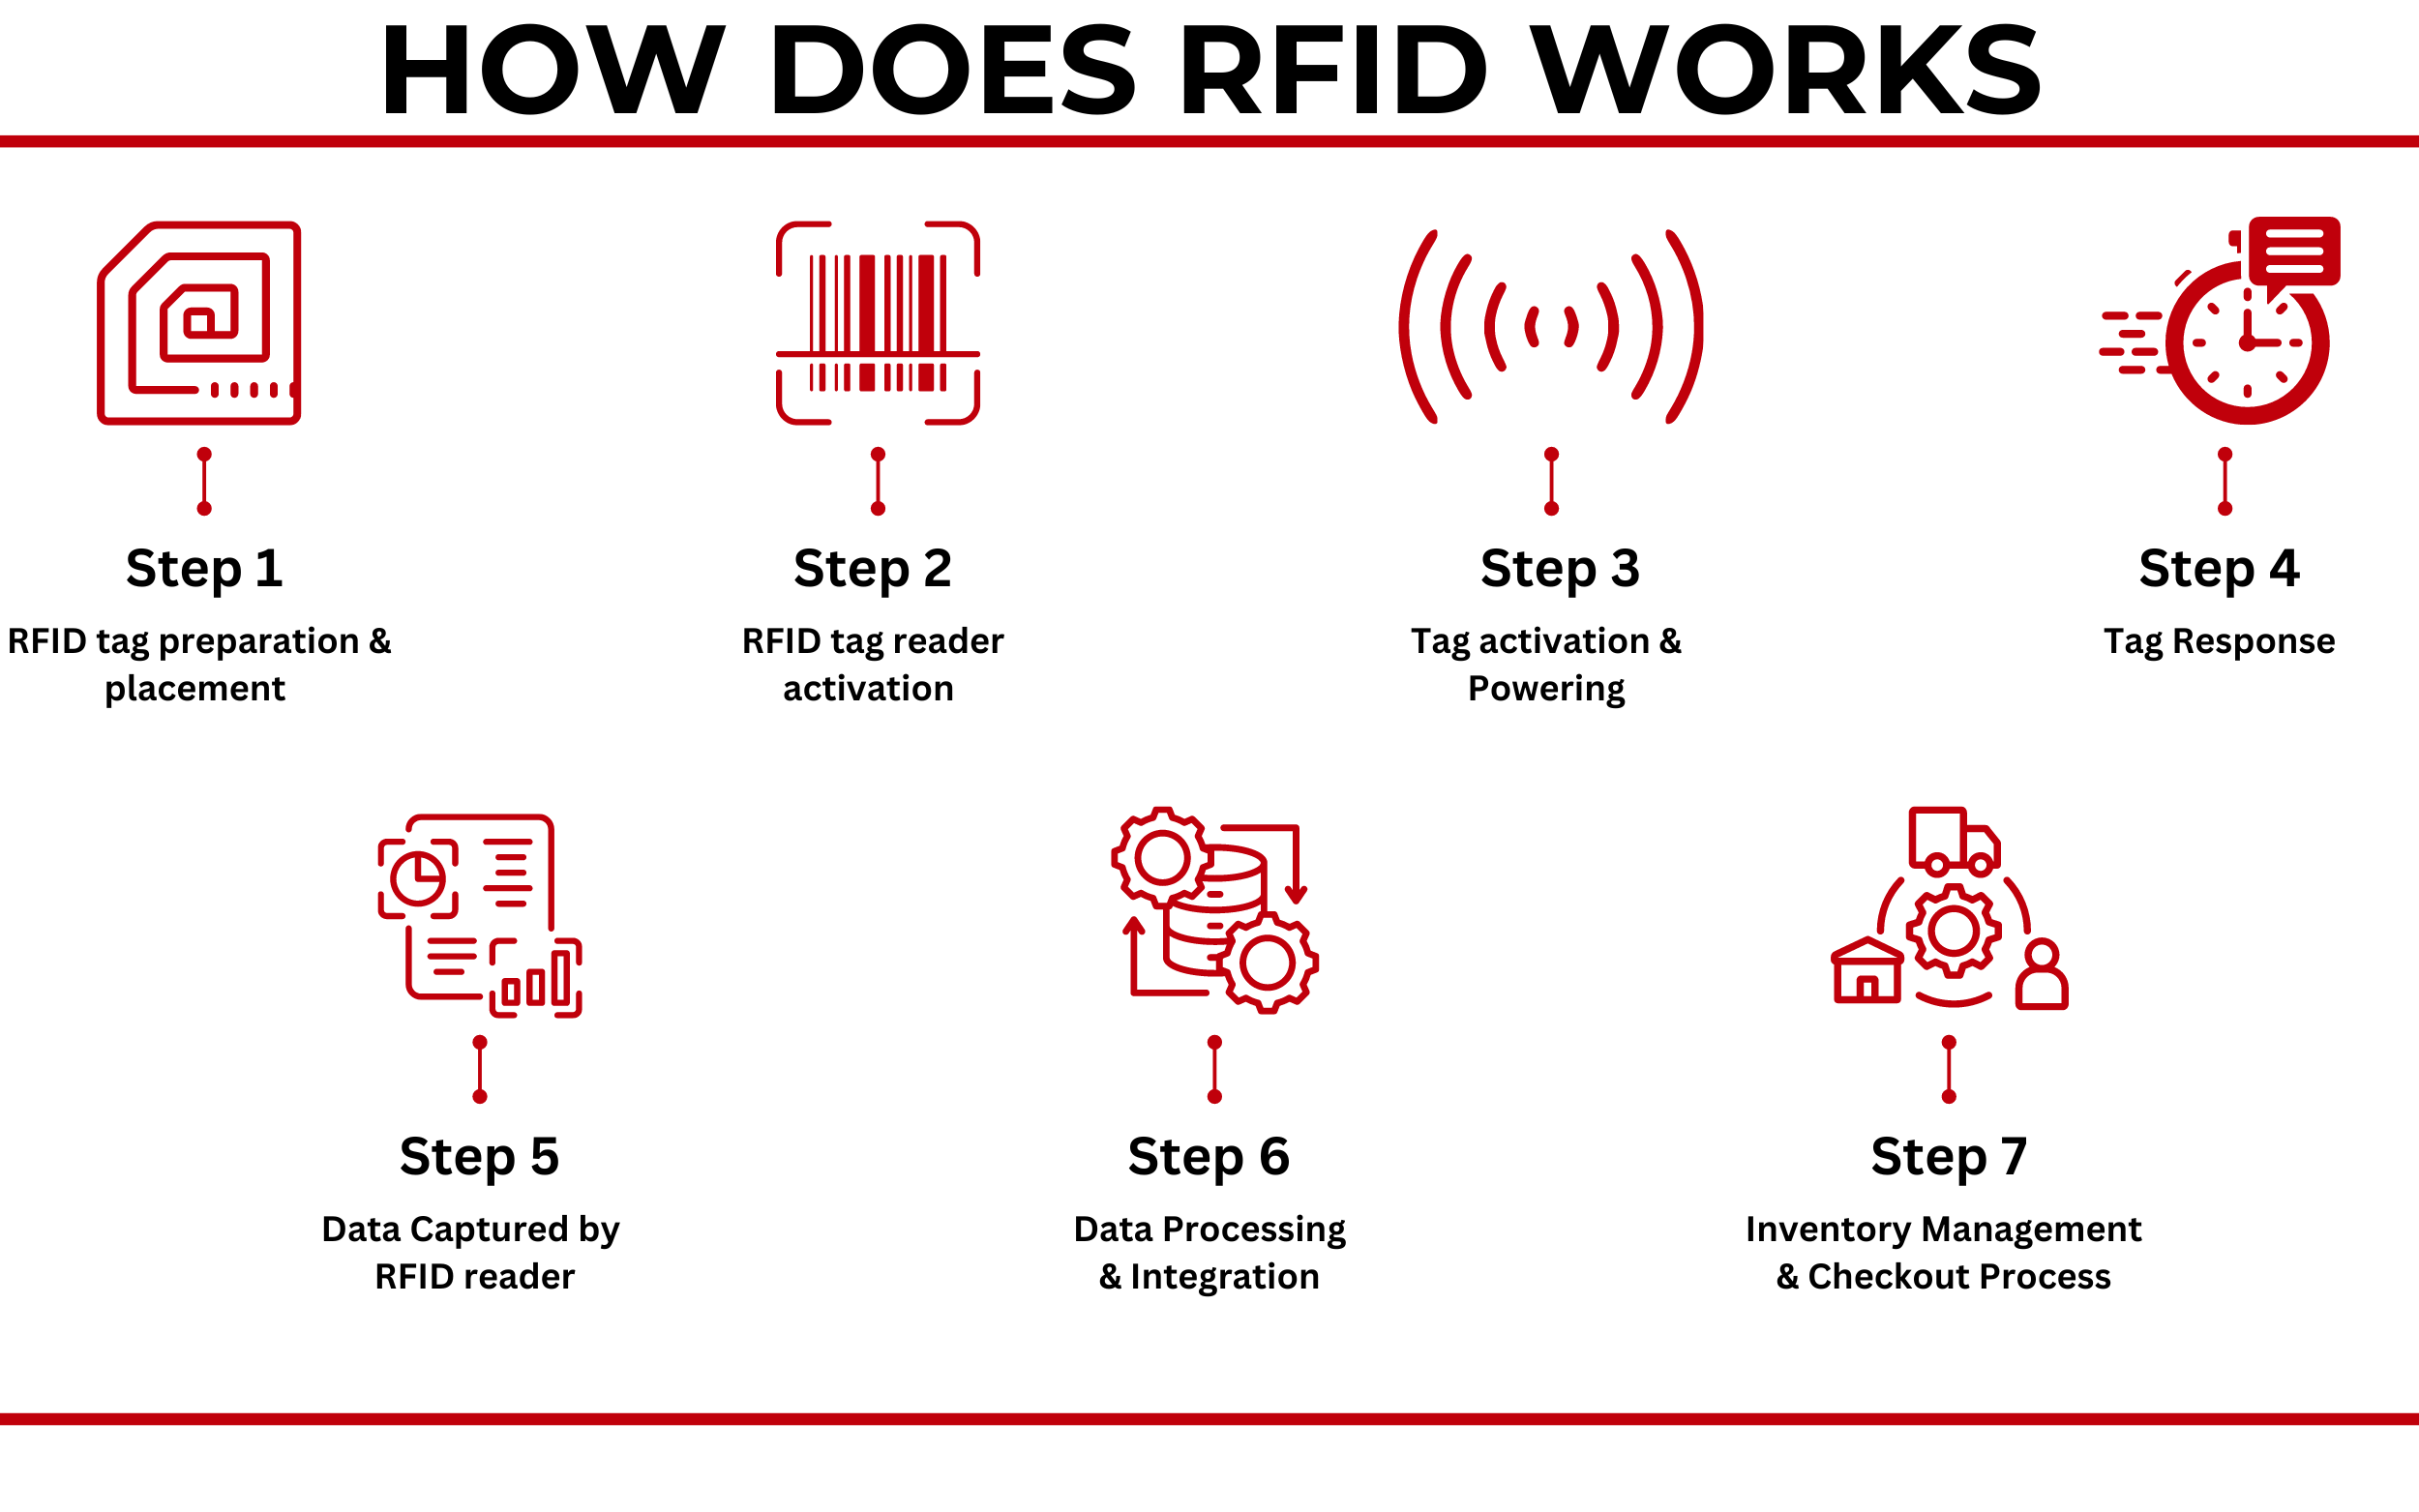 HOW DOES RFID WORKS